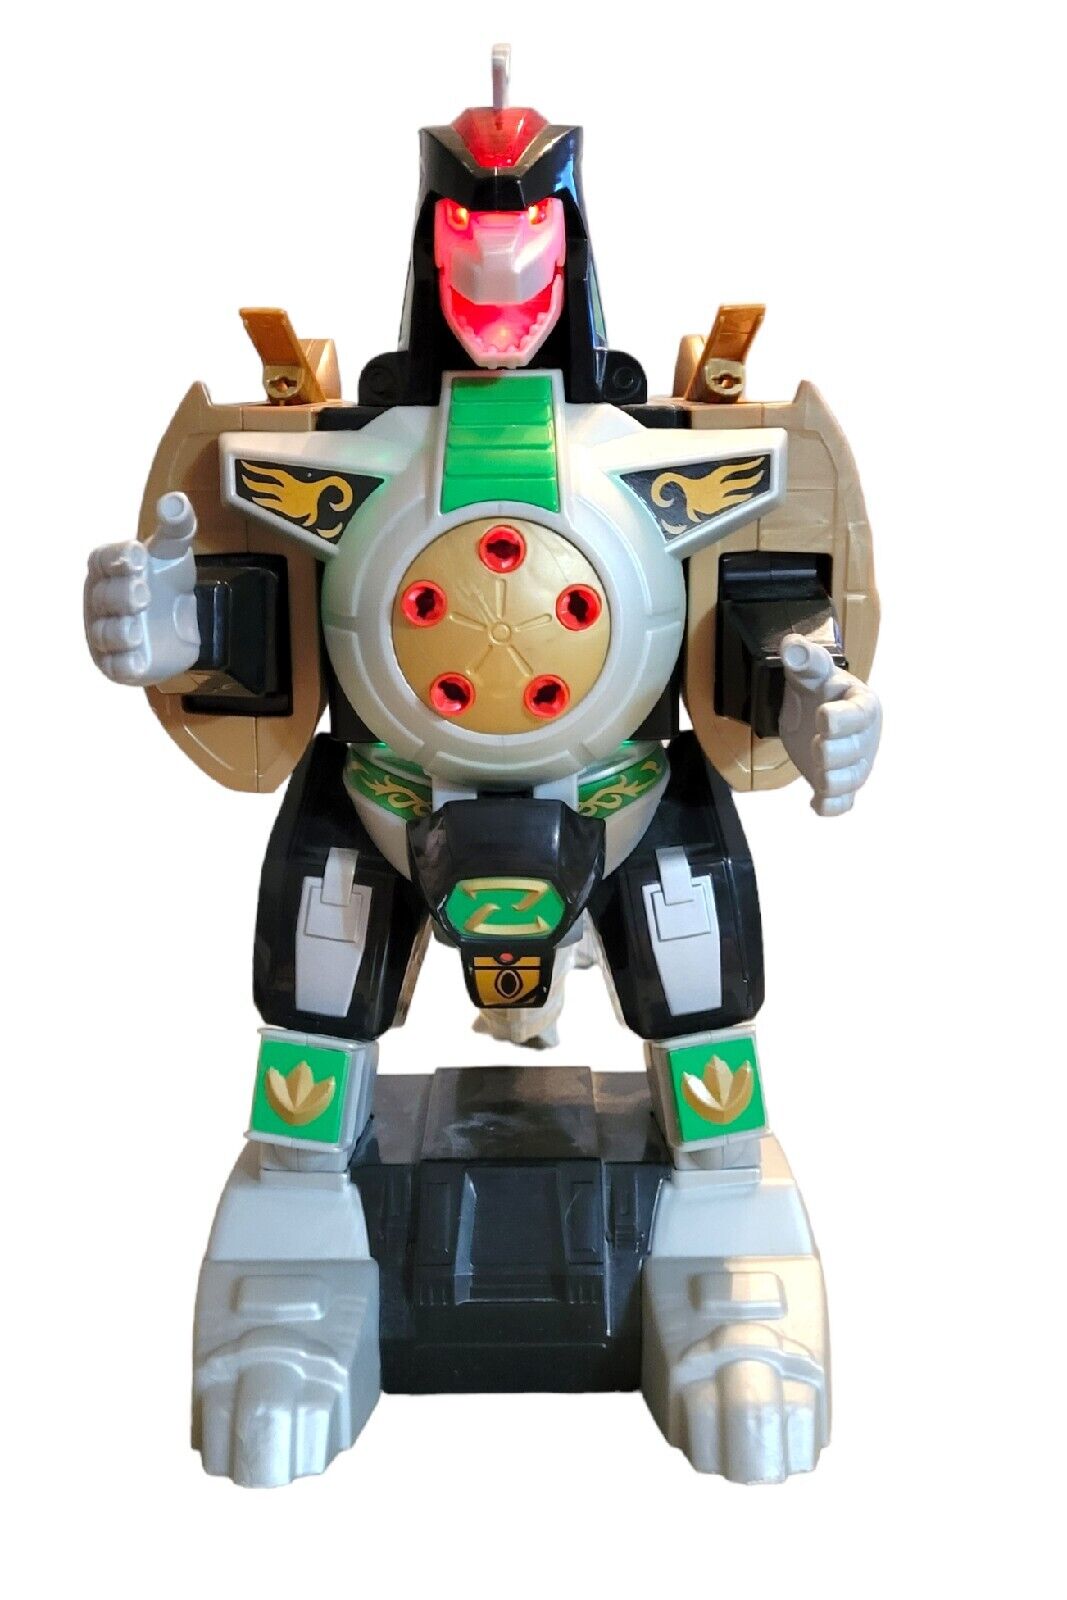 Imaginext Power Rangers Mighty Morphin Dragonzord Works NO REMOTE or Accessories